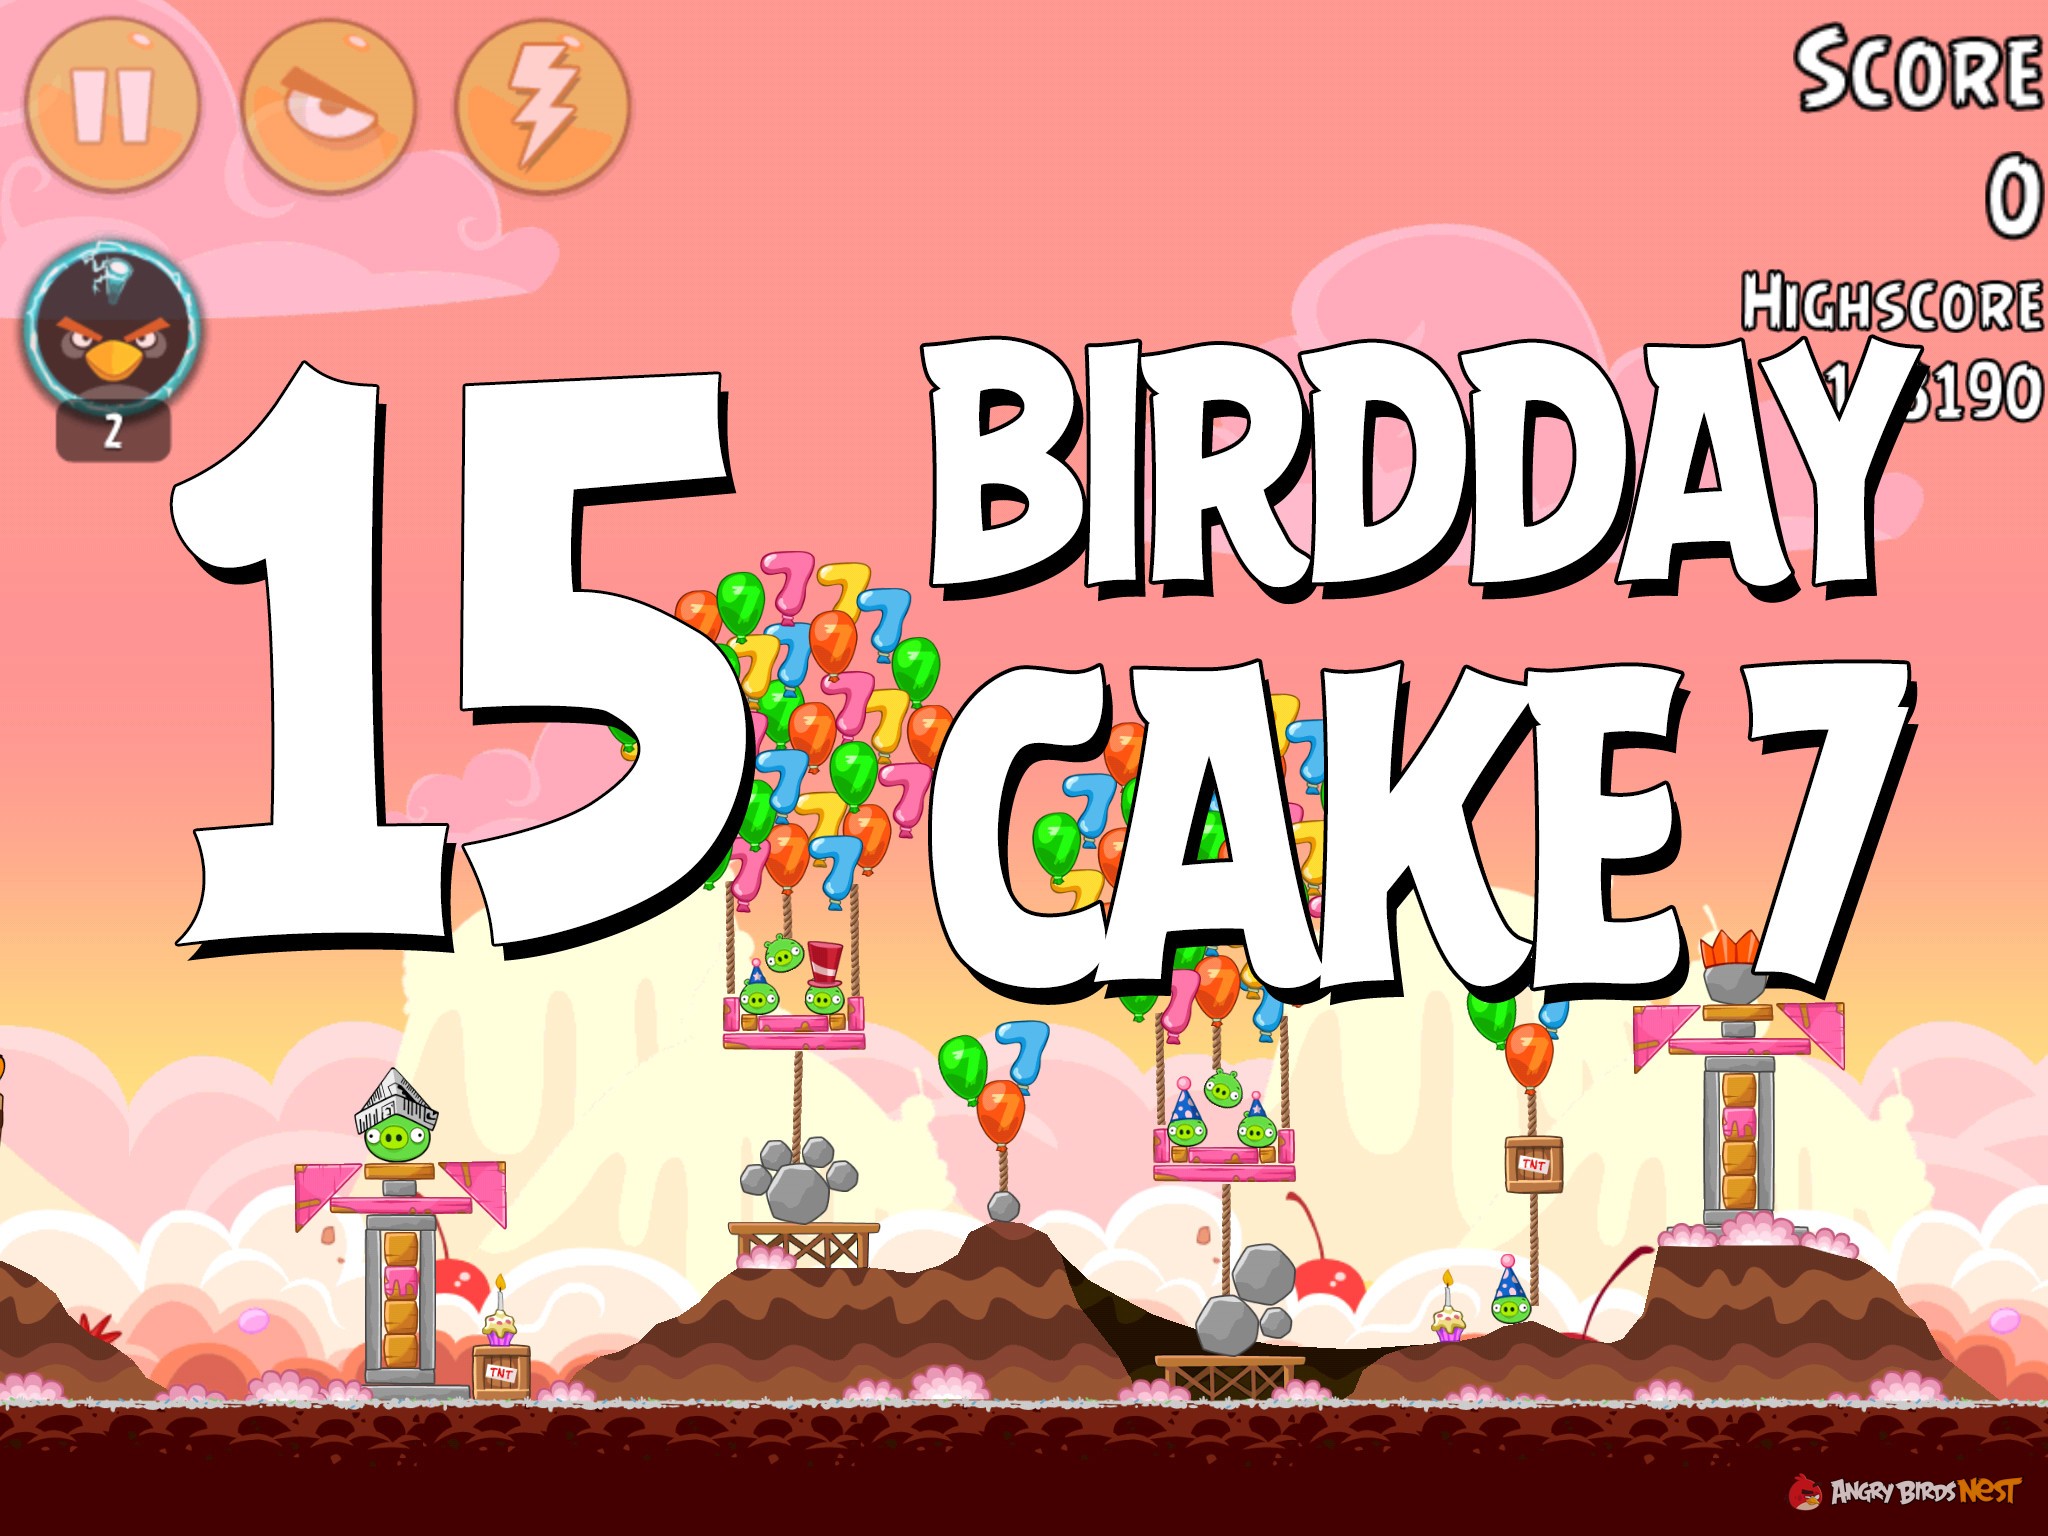 Angry-Birds-Birdday-Party-Cake-7-Level-15